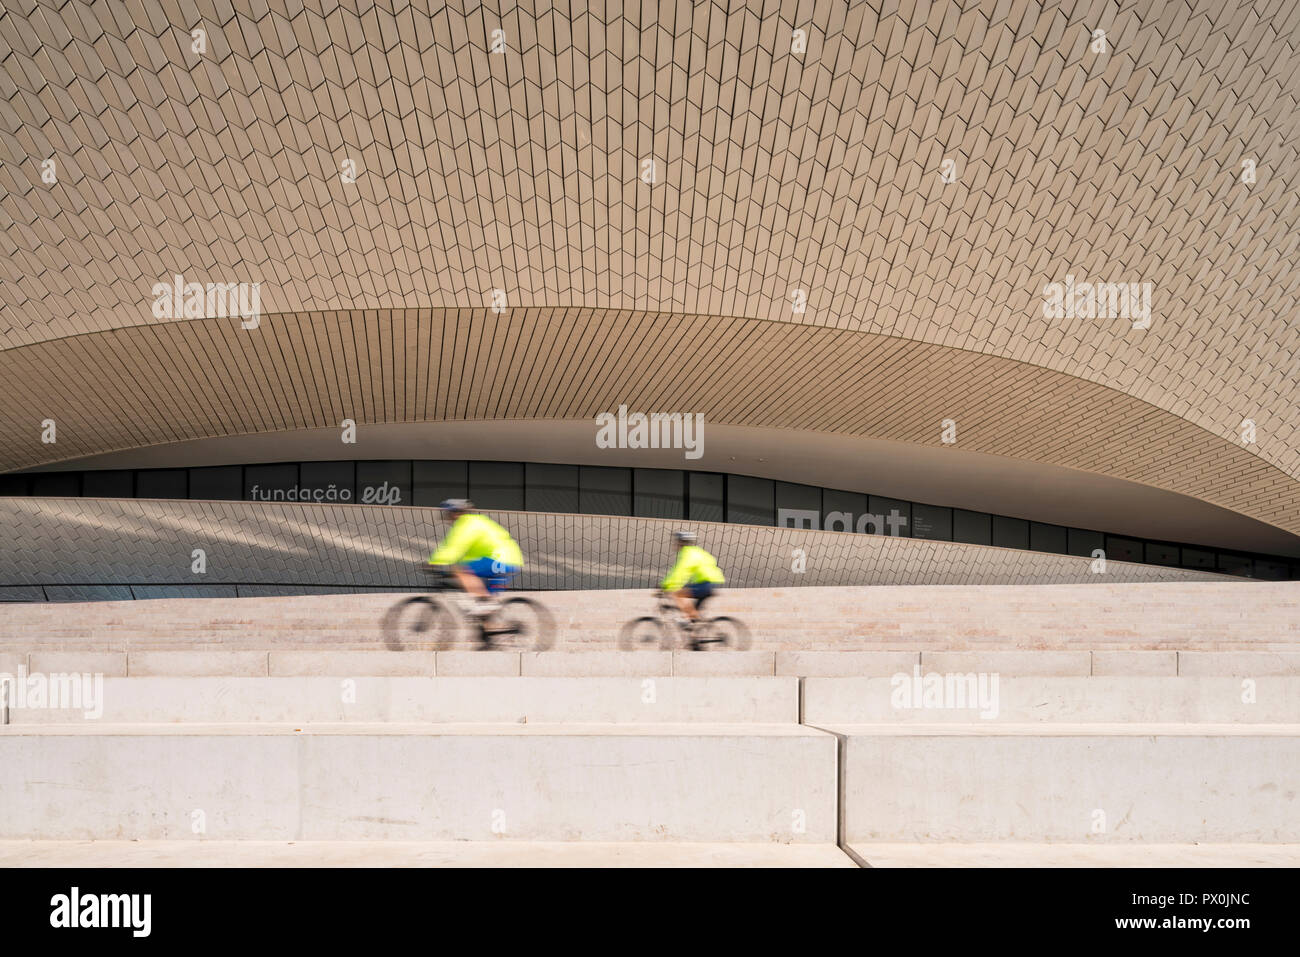 Exterior view of The MAAT - Museum of Art, Architecture and Technology, Lisbon, Portugal. Two cyclists on steps of terrace. Stock Photo